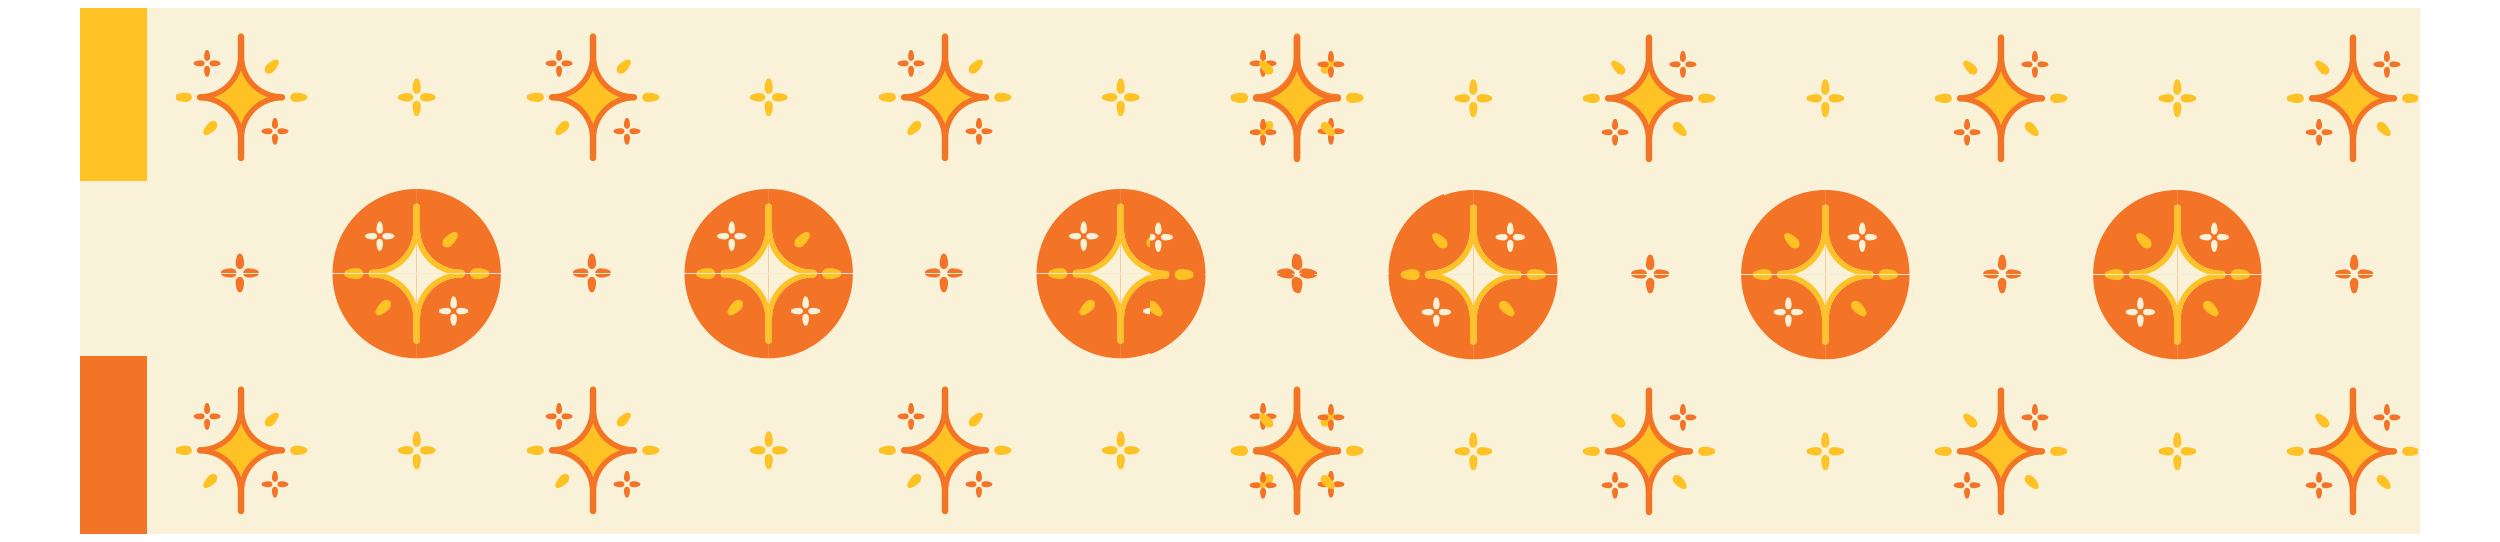 Inspiration zone cream, orange, and yellow pattern with sparkle icons